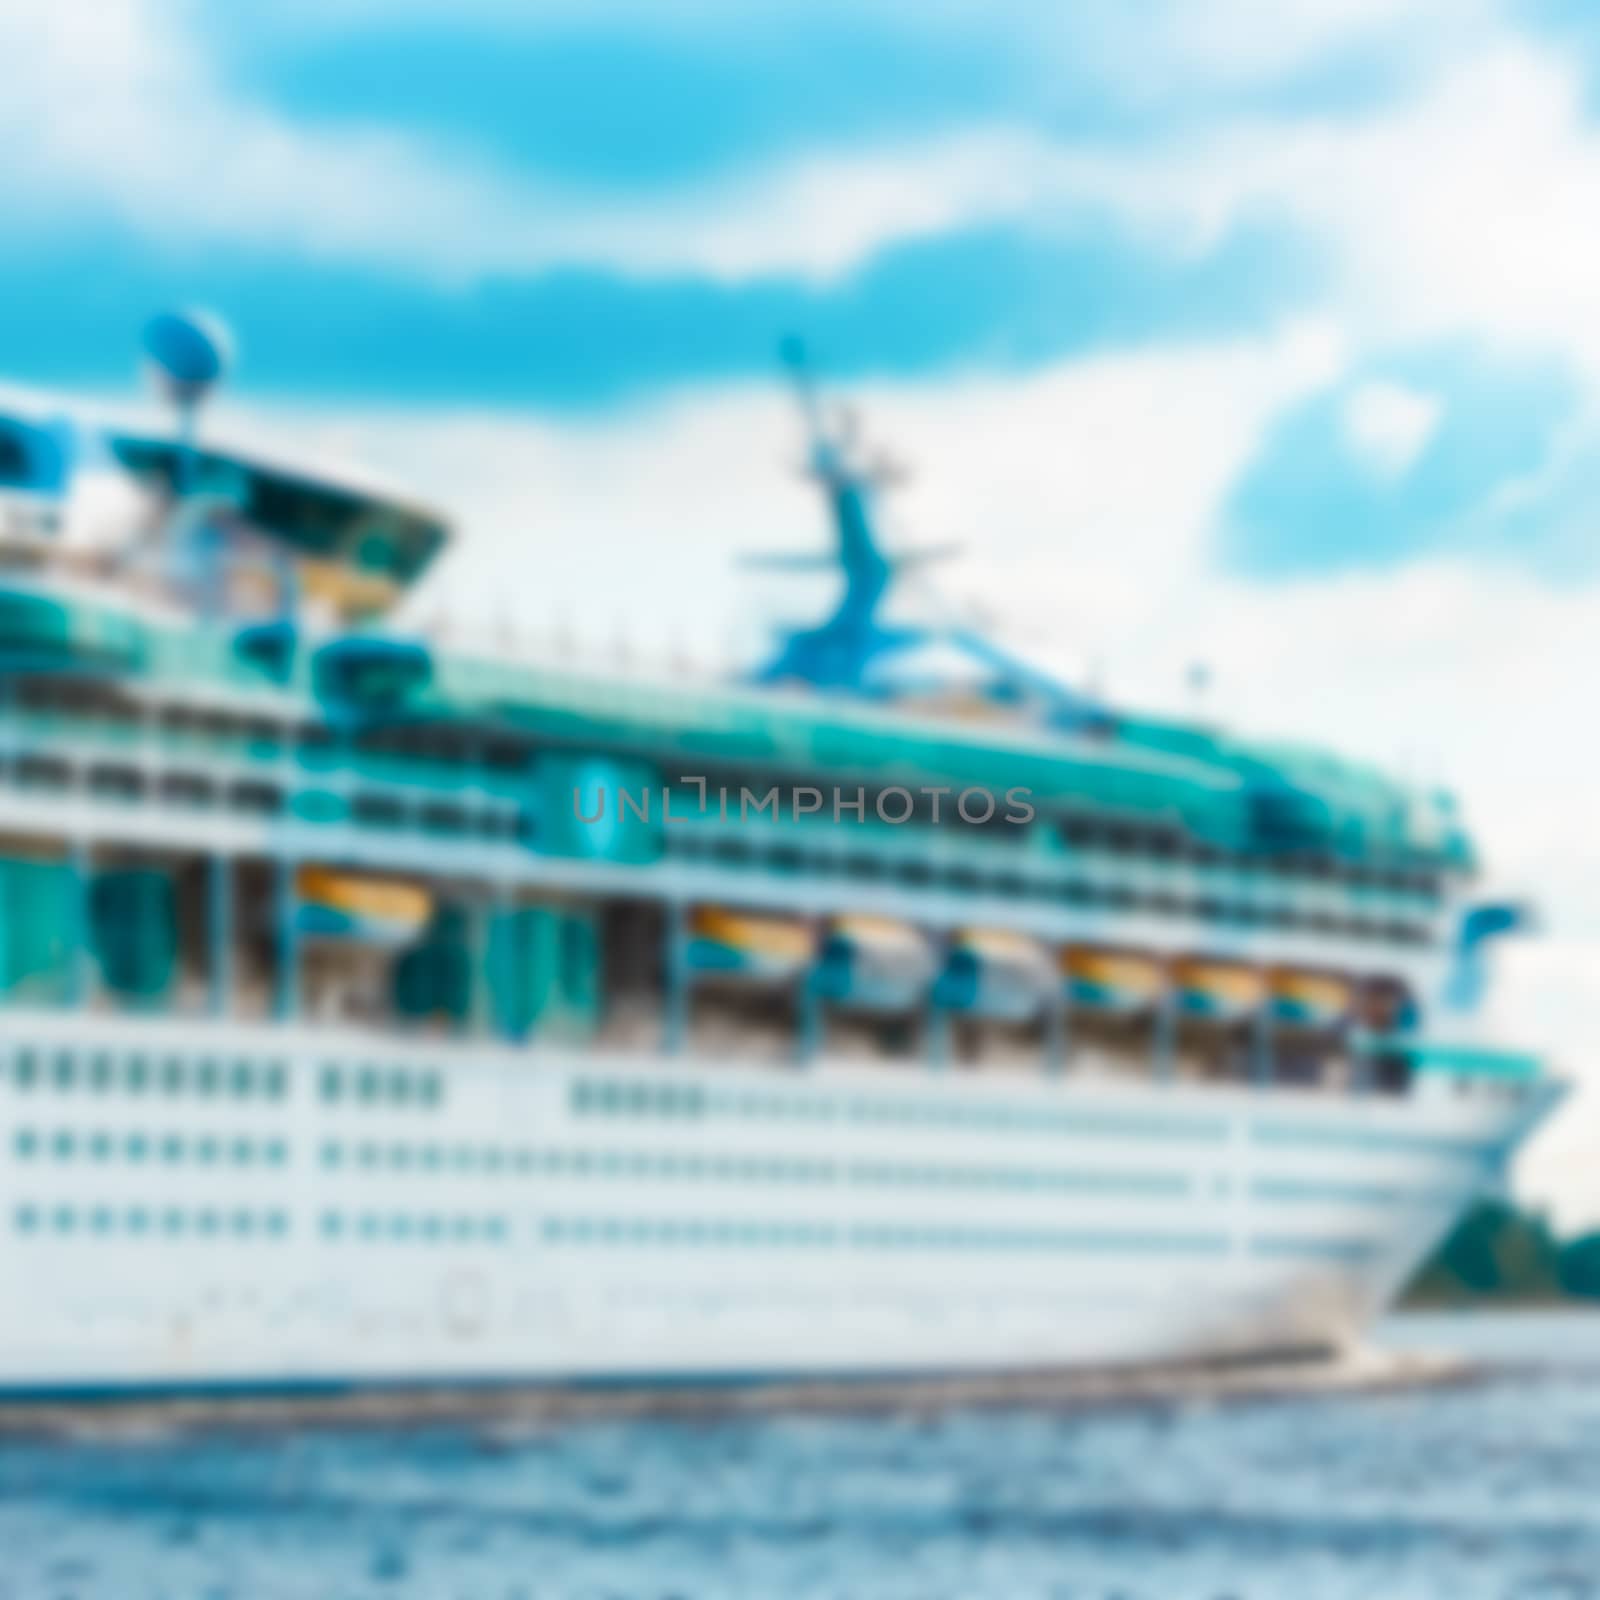 White cruise liner - blurred image by sengnsp